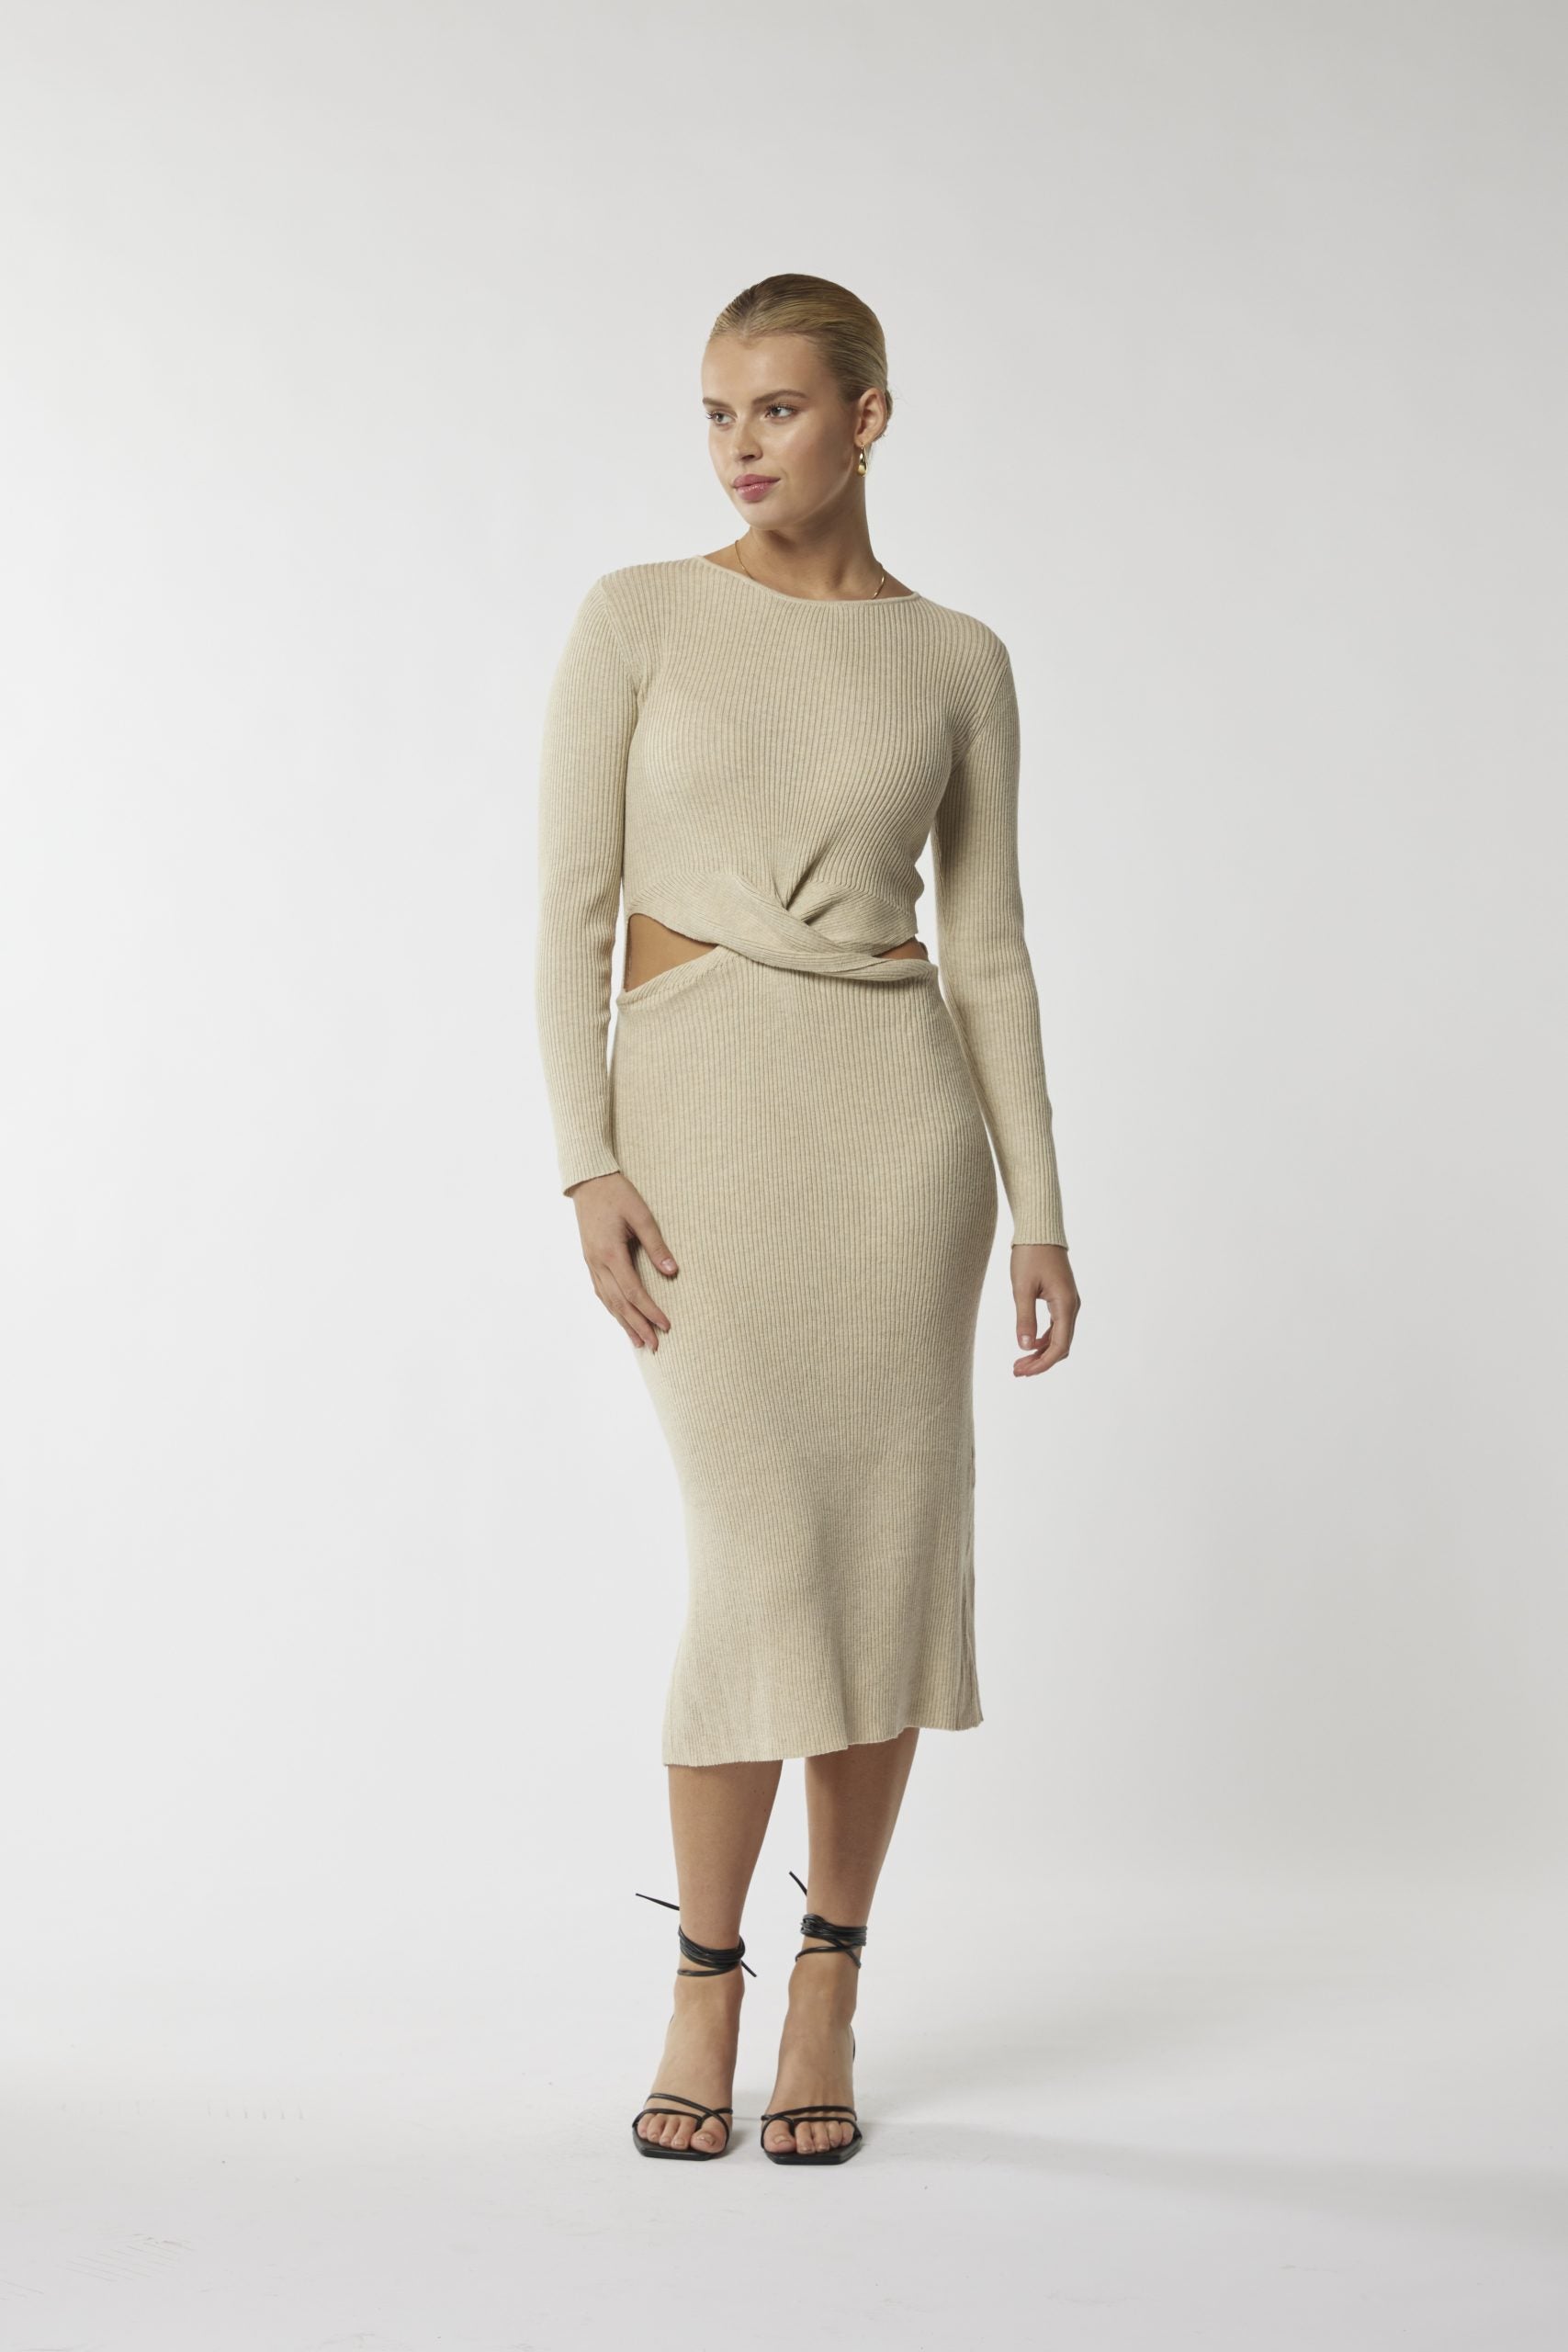 Chic sophistication: Beige midi with waist cut-out. Unbeatable style awaits!